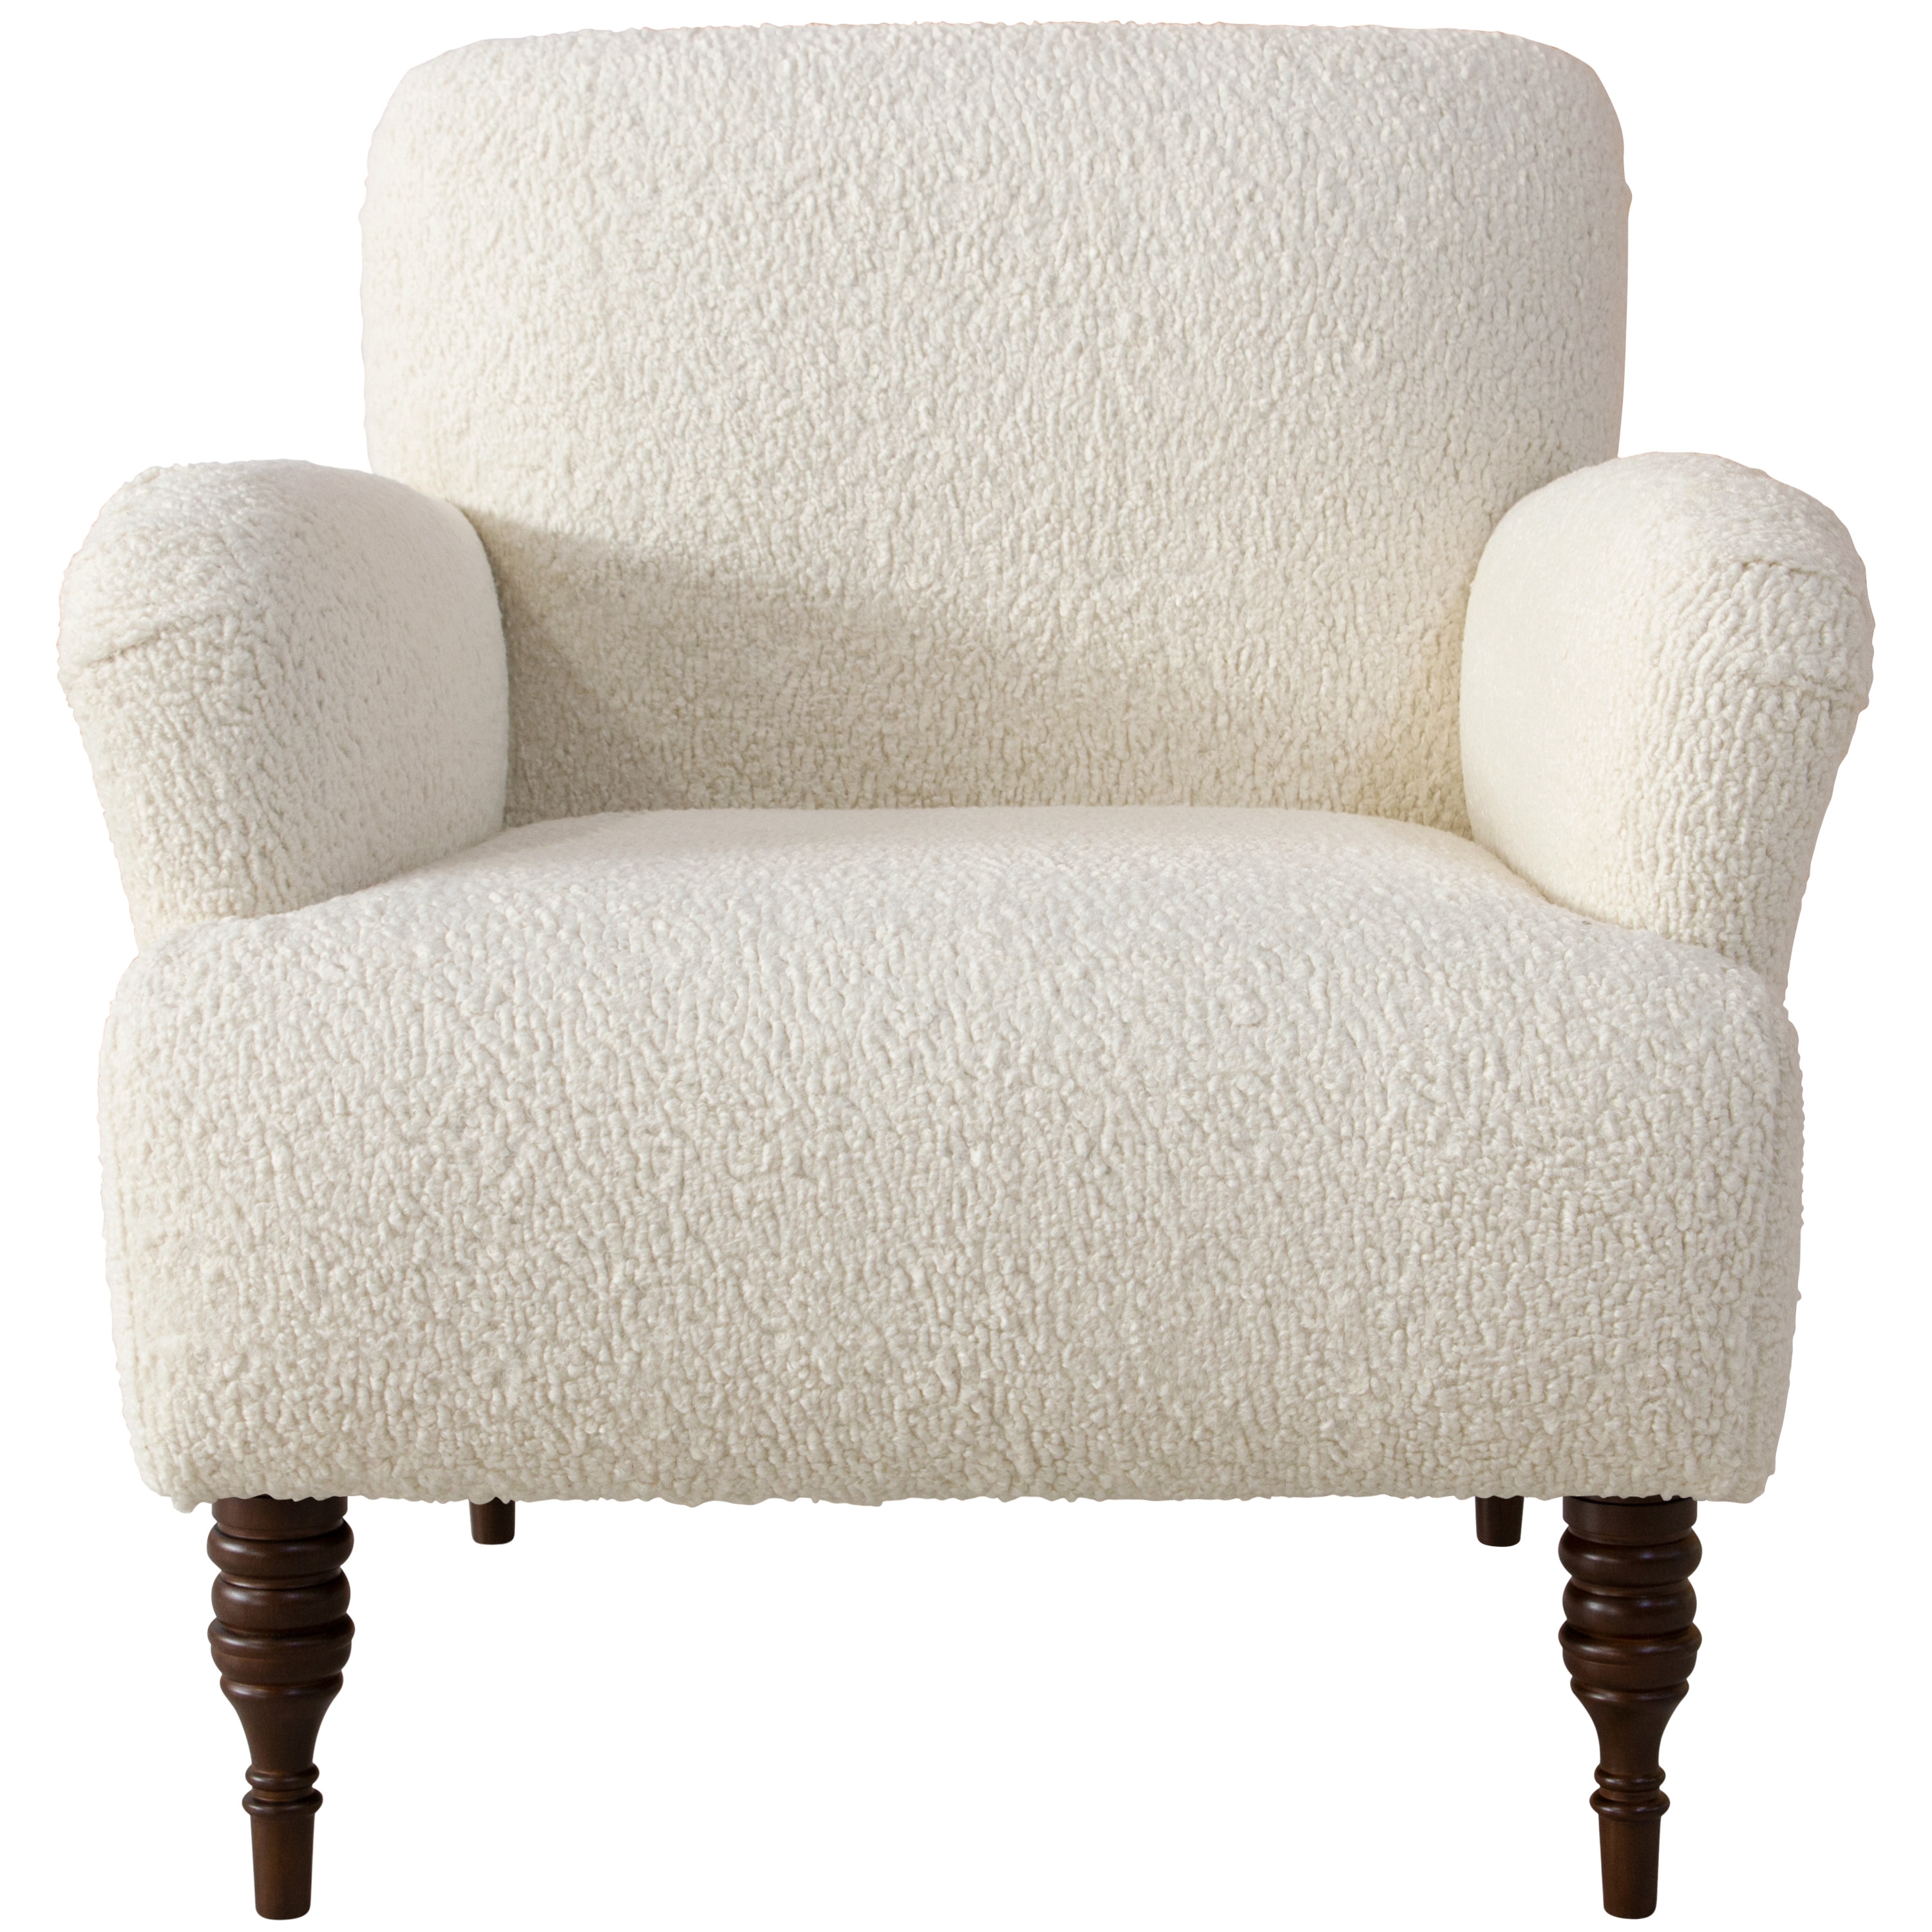 Norwood Chair in Sheepskin Natural - Image 1